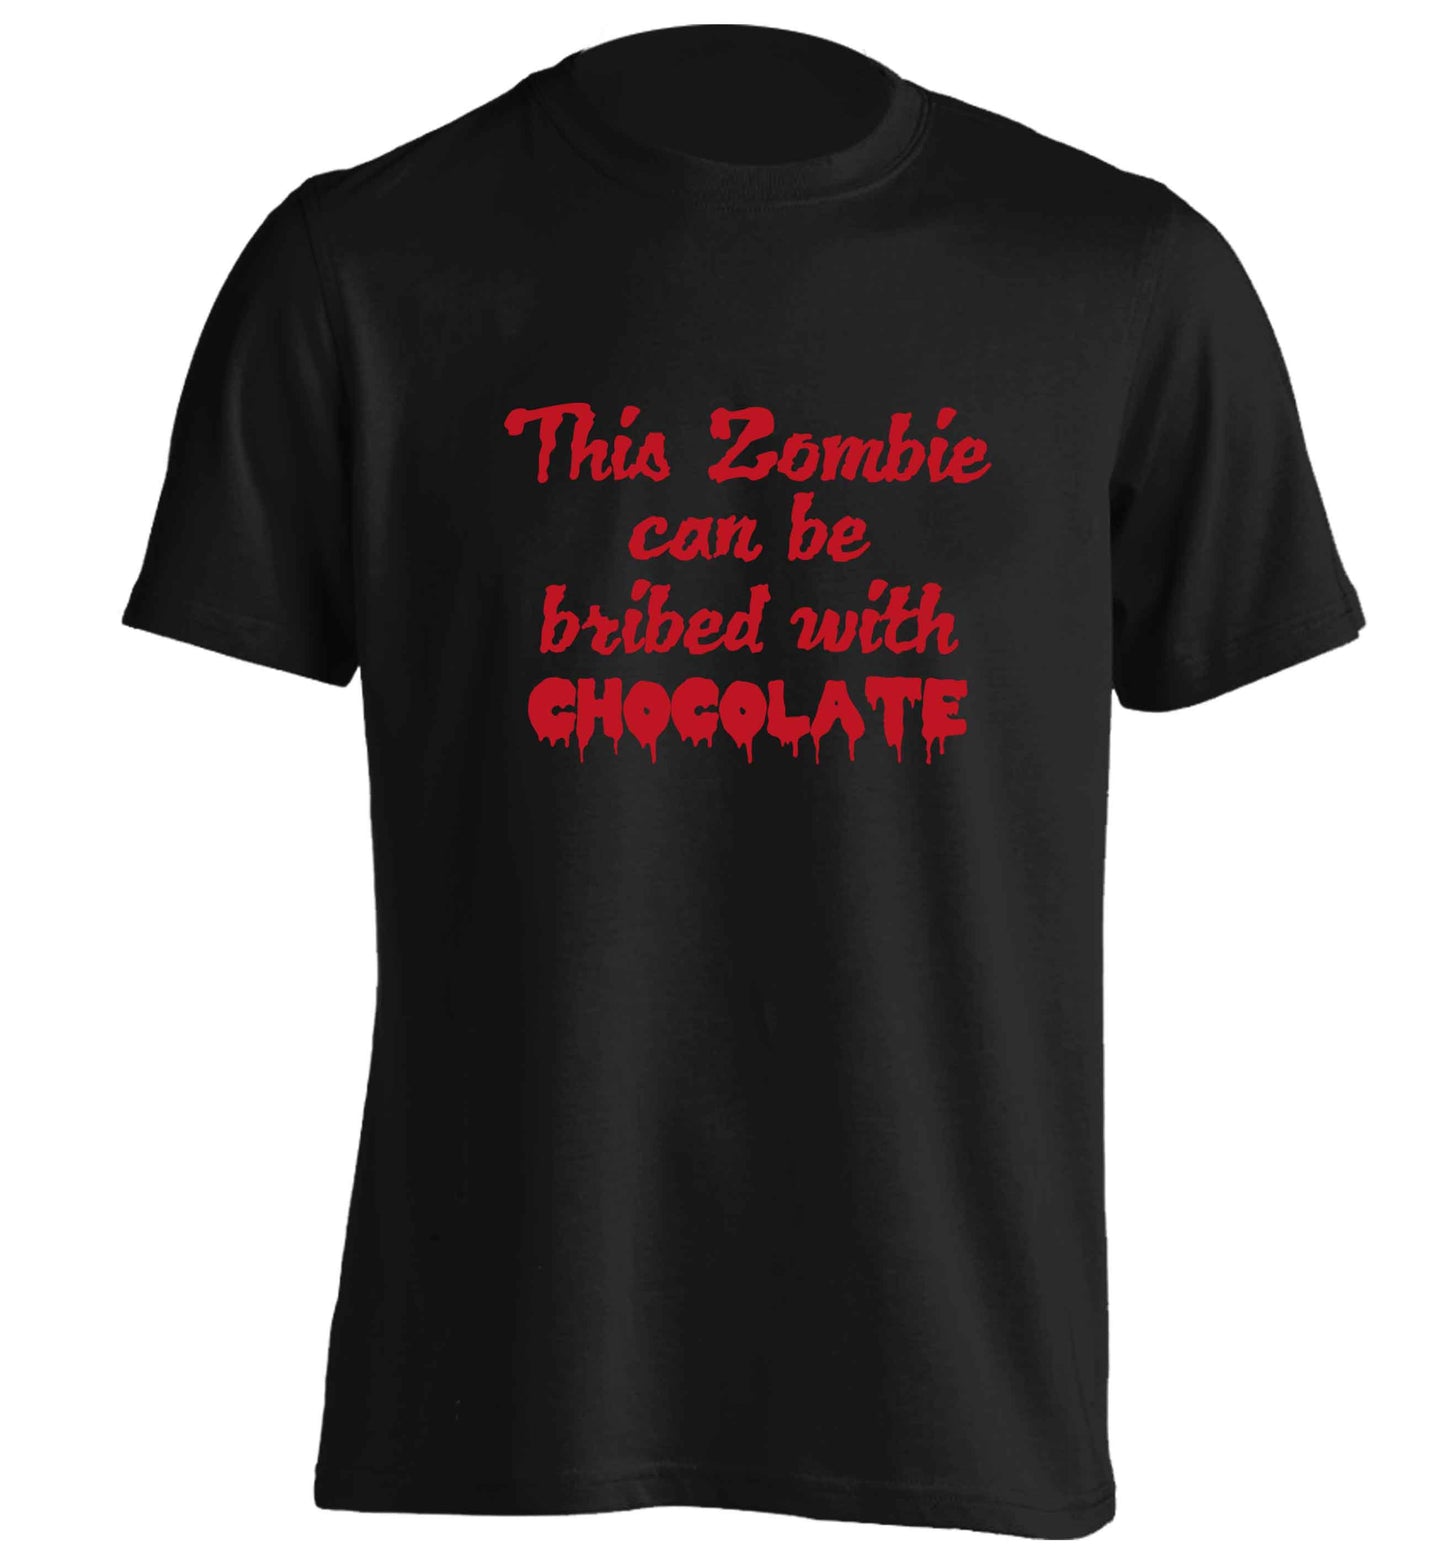 This zombie can be bribed with chocolate adults unisex black Tshirt 2XL